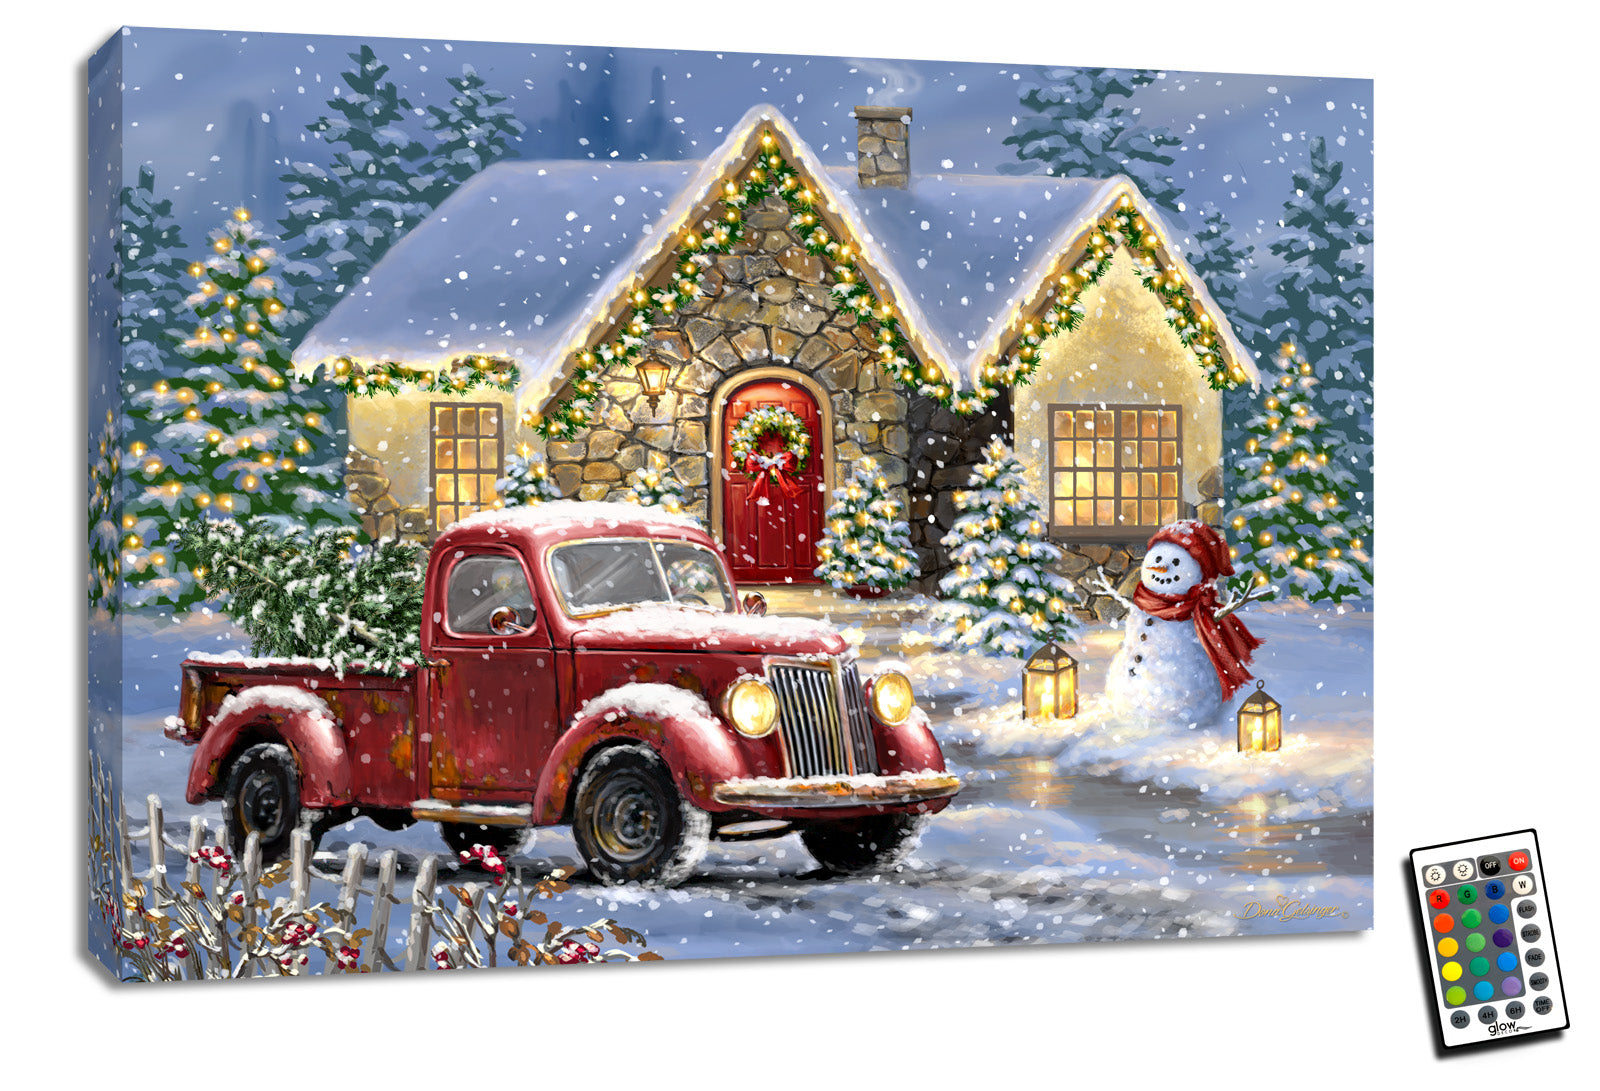 Christmas Light Lane's 18x24 Fully Illuminated LED Art, featuring a stunning portrayal of an old-fashioned red truck parked in front of a cozy snow-covered house, complete with a snowman in the front yard.